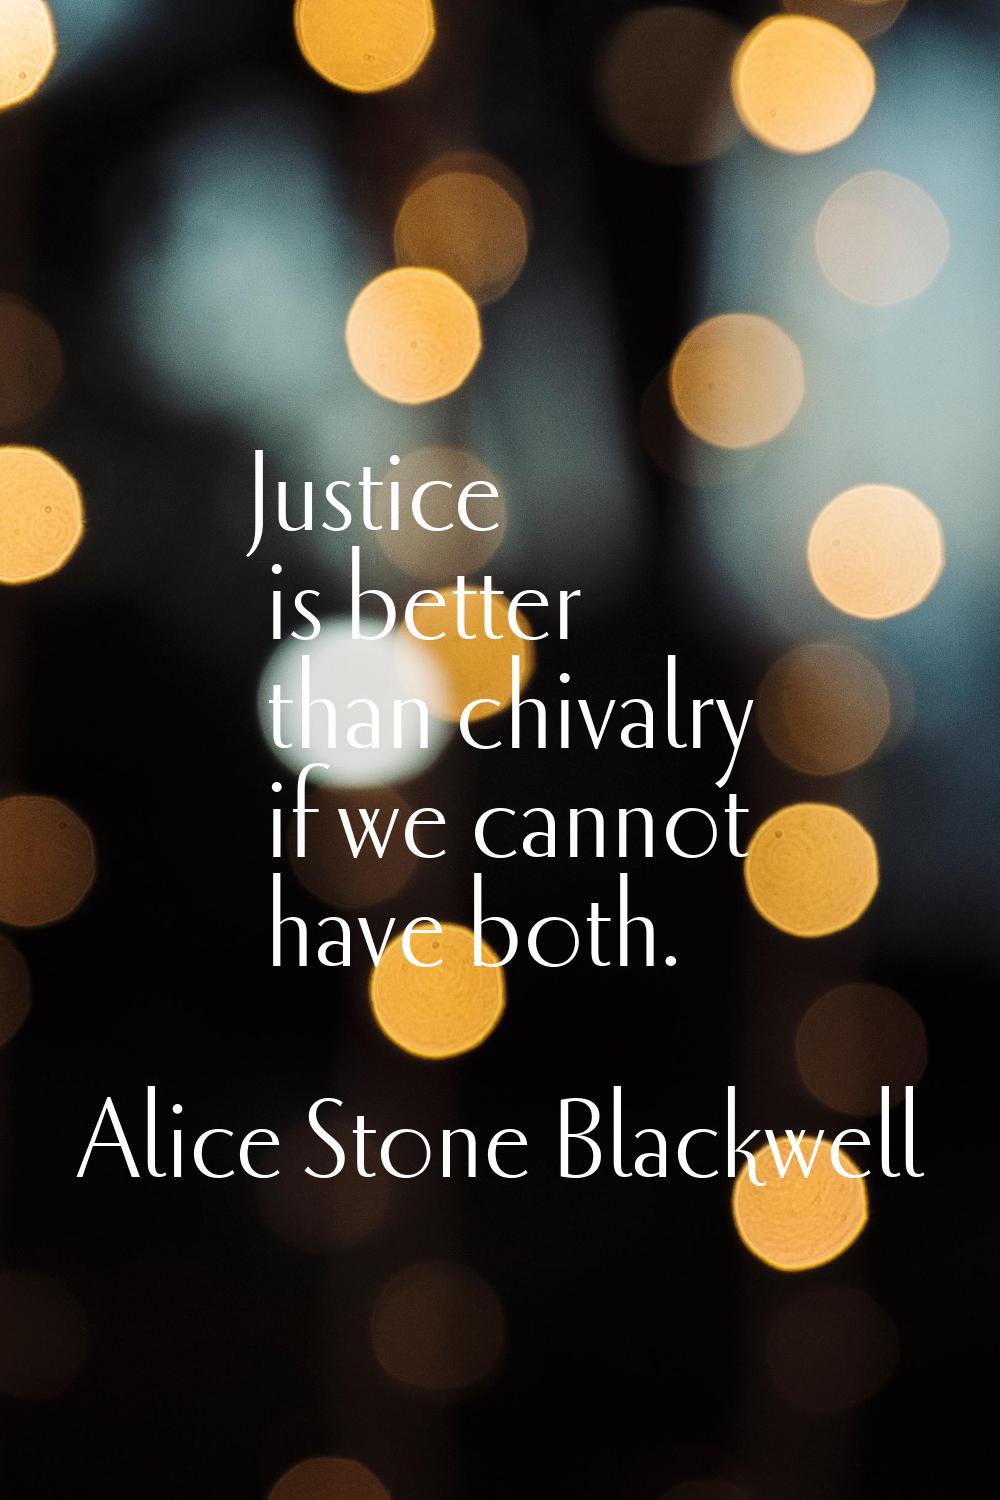 Justice is better than chivalry if we cannot have both.